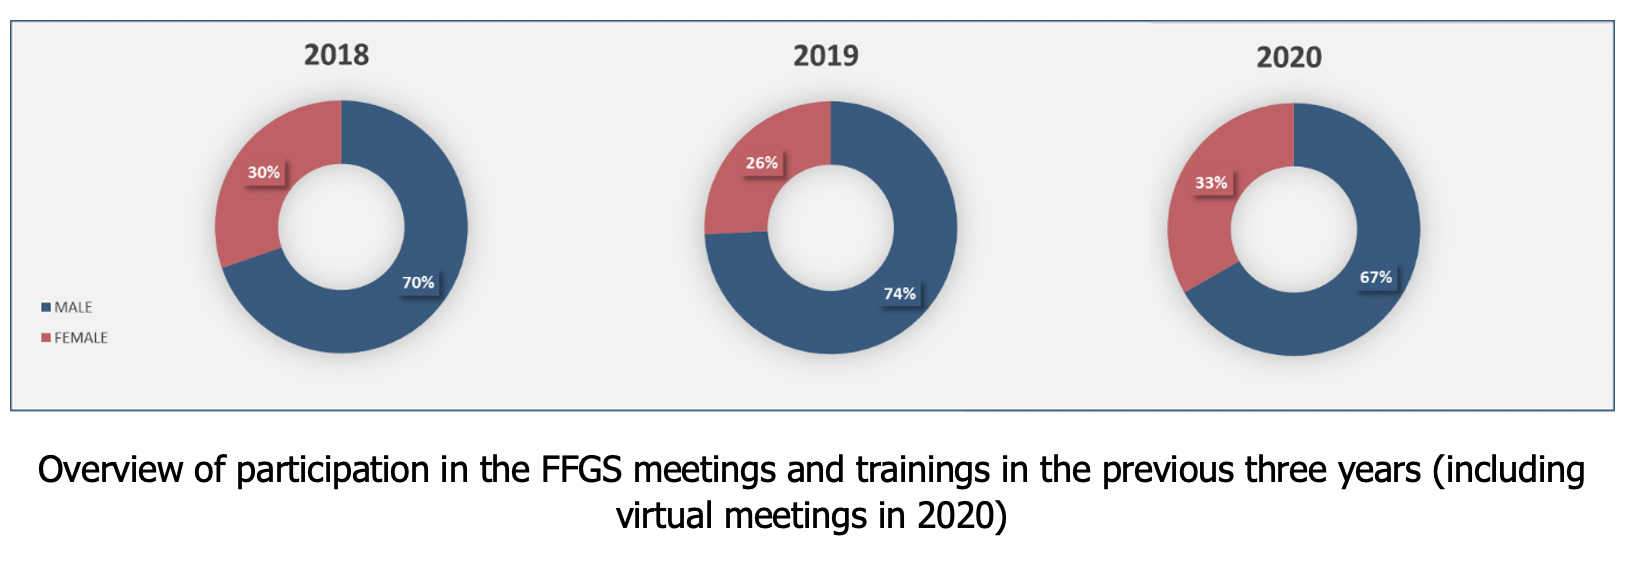 Overview of participation in the FFGS meetings and trainings 